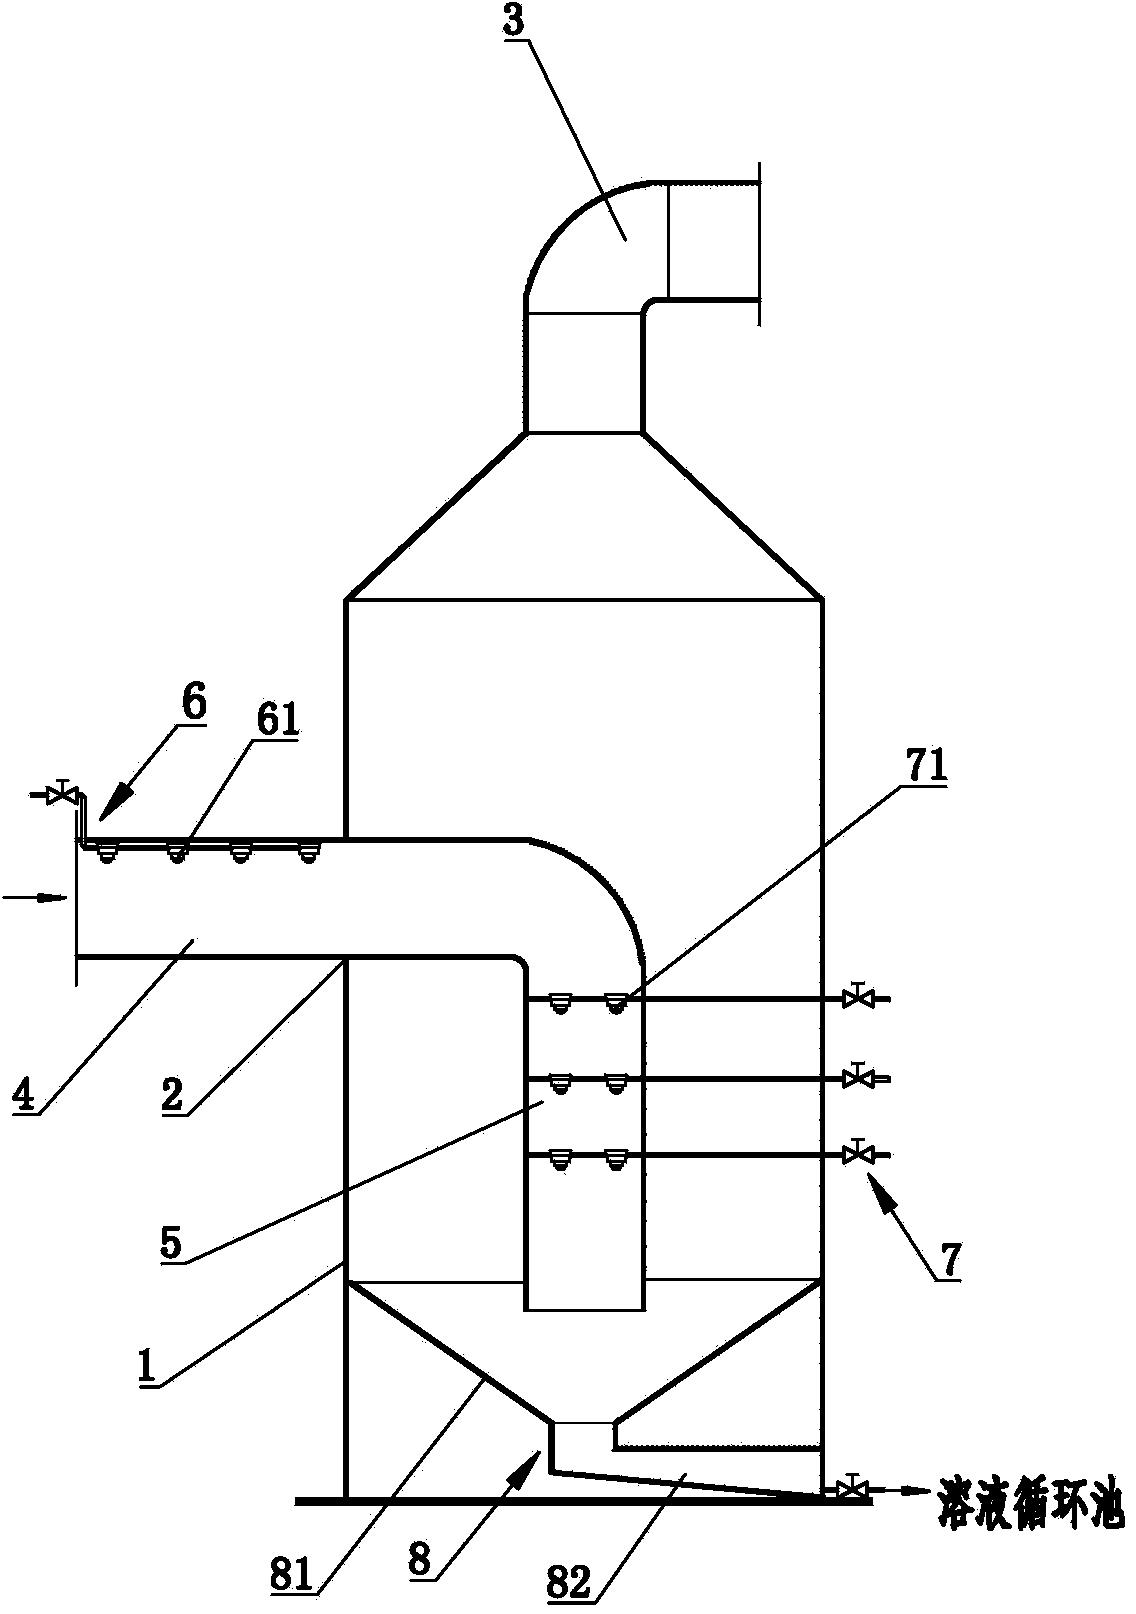 Boiler flue gas desulfurization, denitration and mercury removal integrated purification device